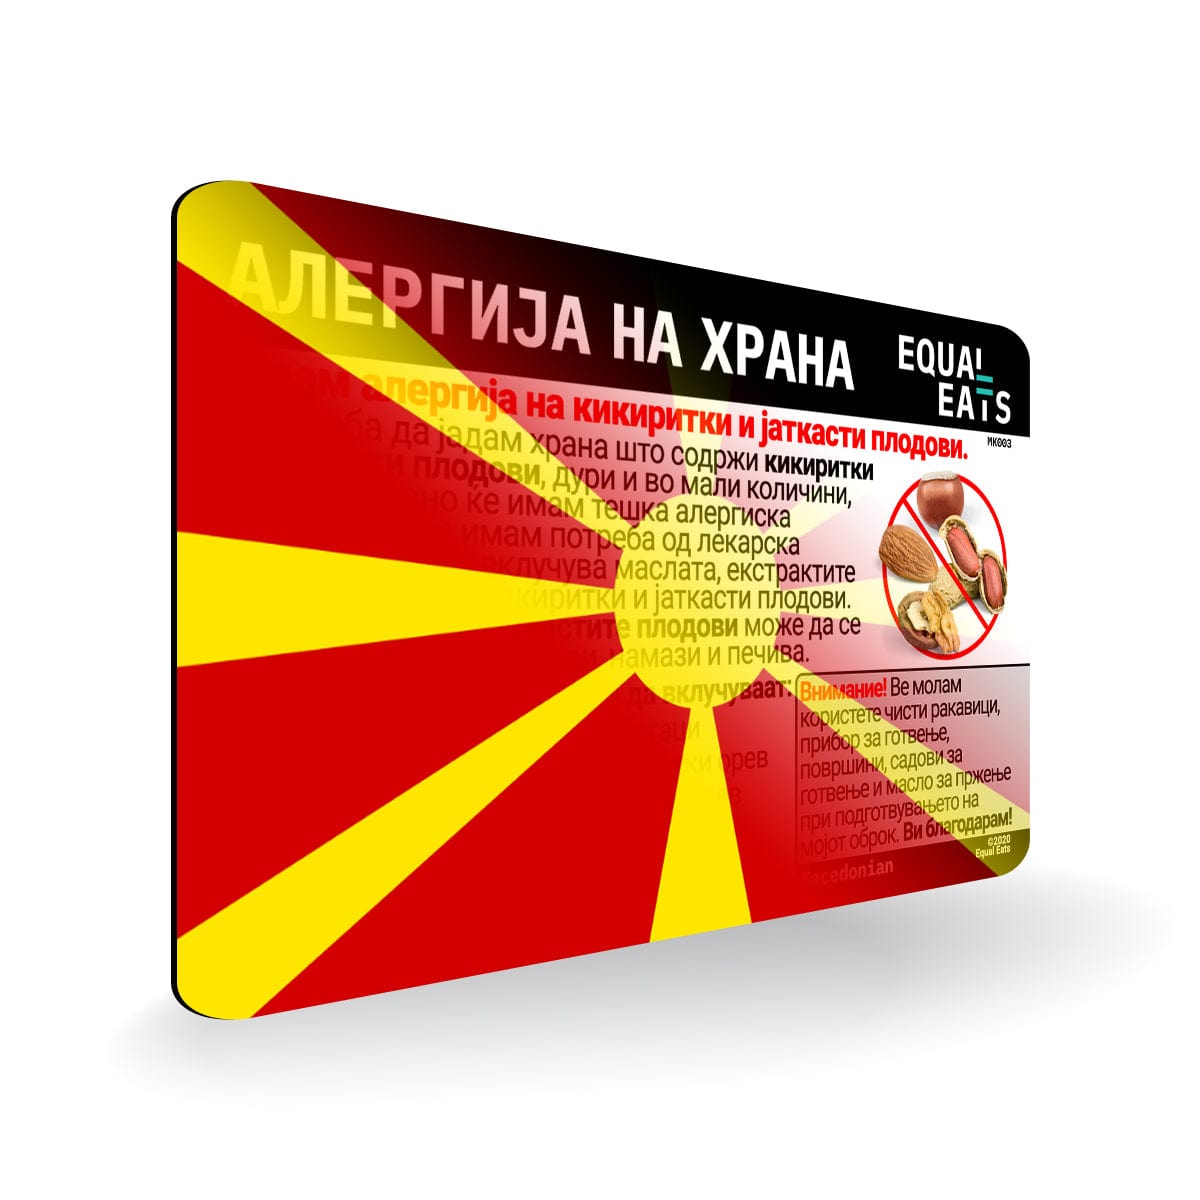 Peanut and Tree Nut Allergy in Macedonian. Peanut and Tree Nut Allergy Card for Macedonia Travel